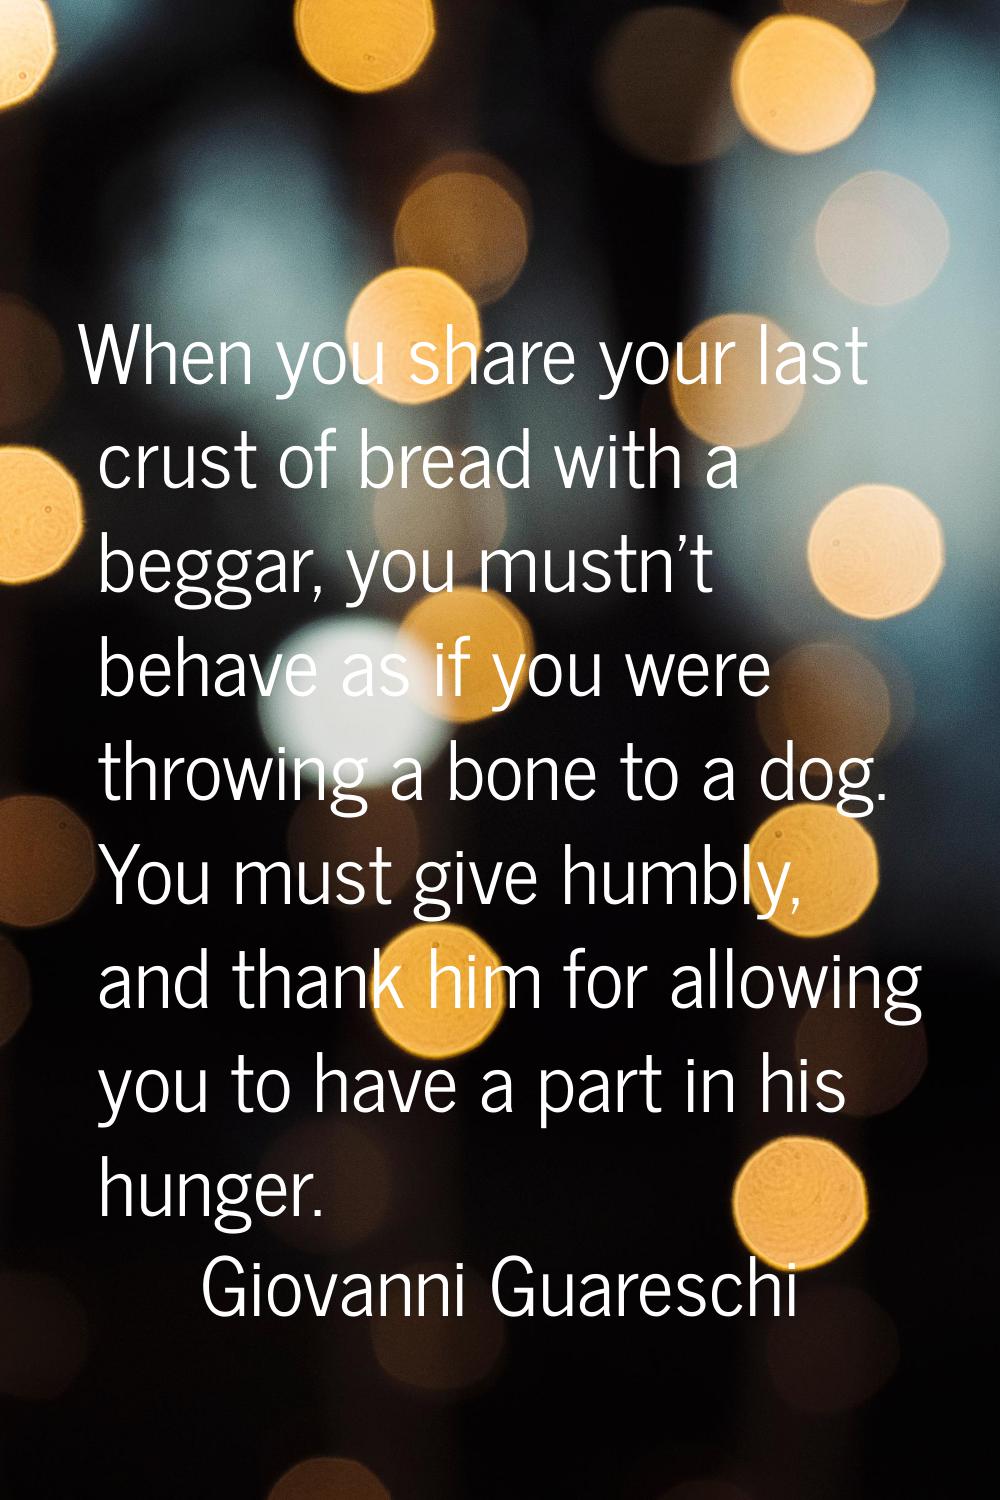 When you share your last crust of bread with a beggar, you mustn't behave as if you were throwing a